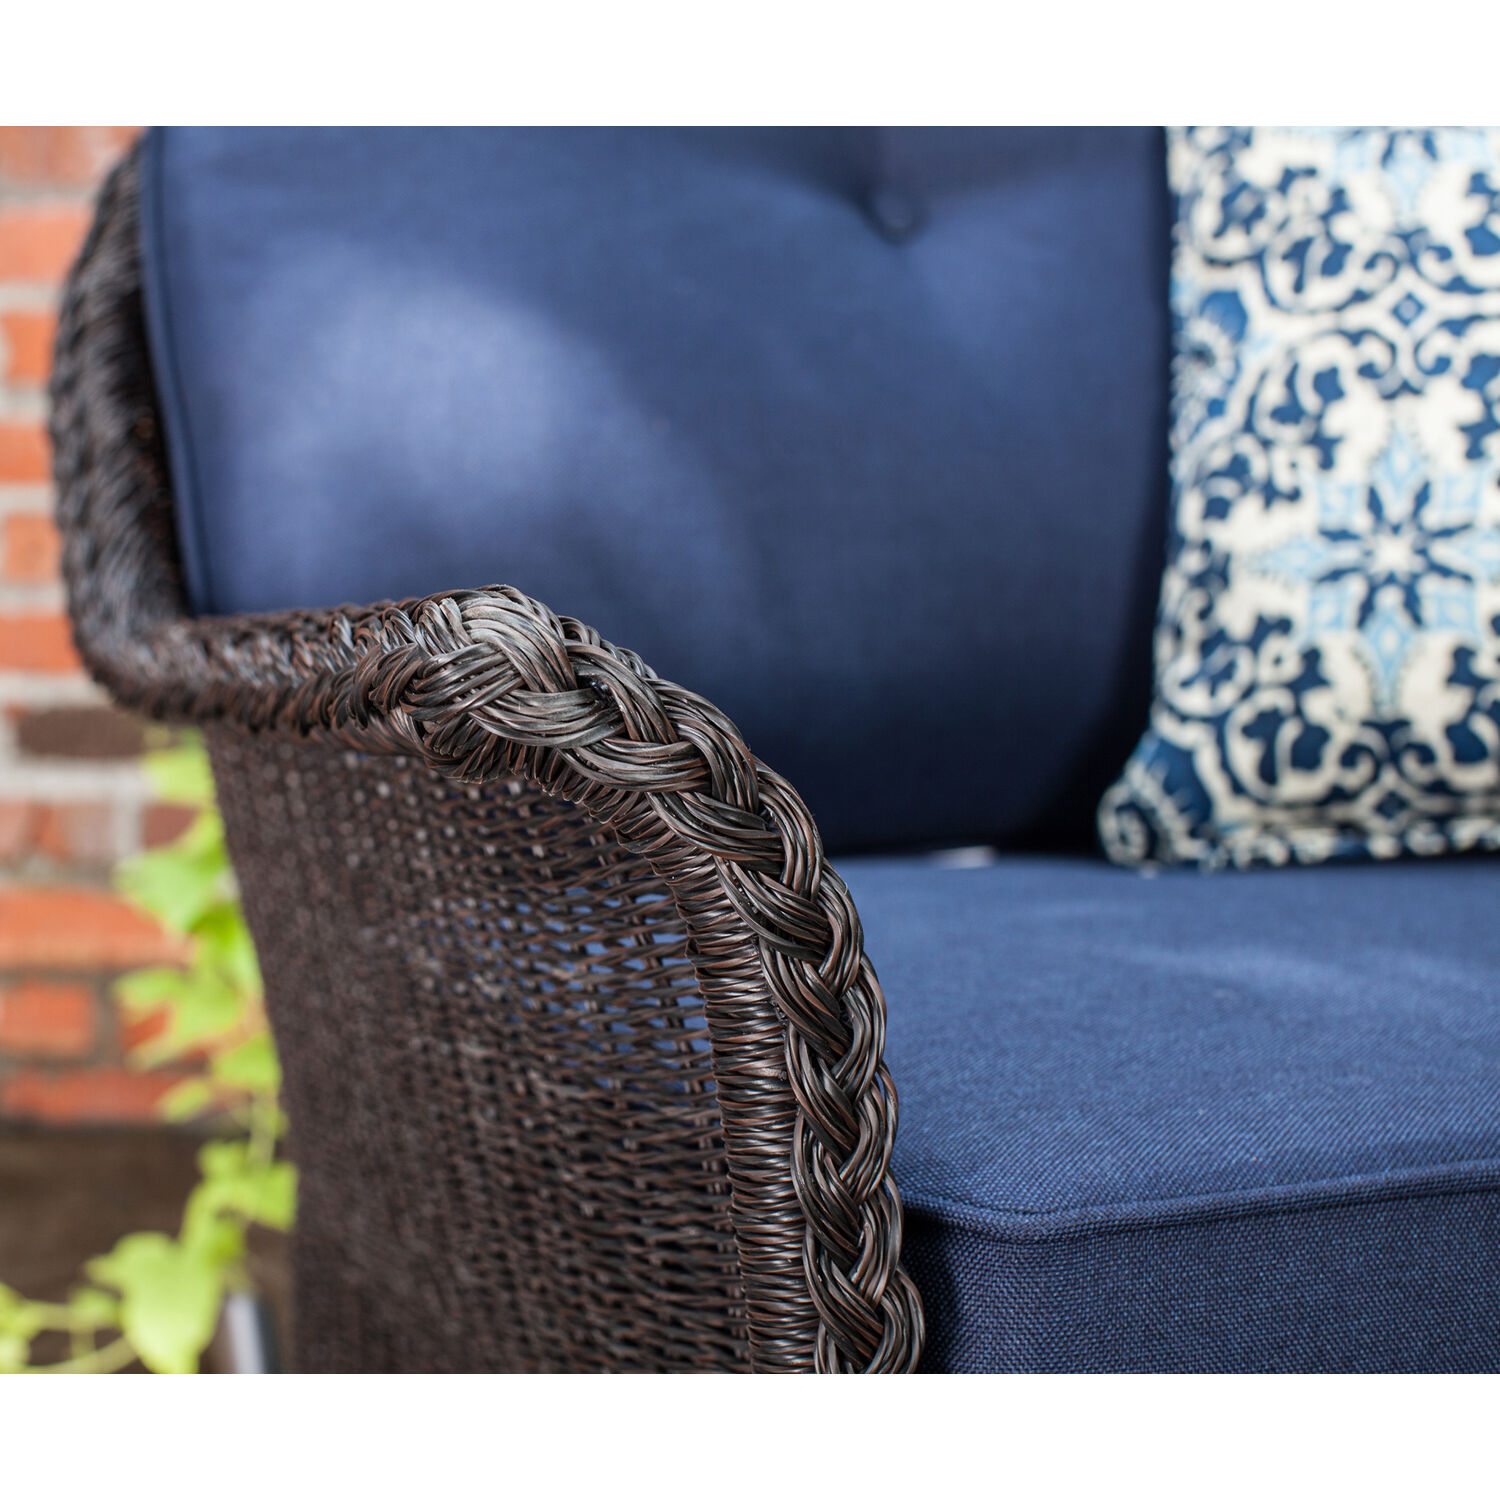 Hanover Sun Porch 6-Pc. Resin Lounge Set w/ Handwoven Loveseat, 2 Armchairs, 2 Ottomans, Coffee Table and Plush Navy Blue Cushions - image 3 of 14